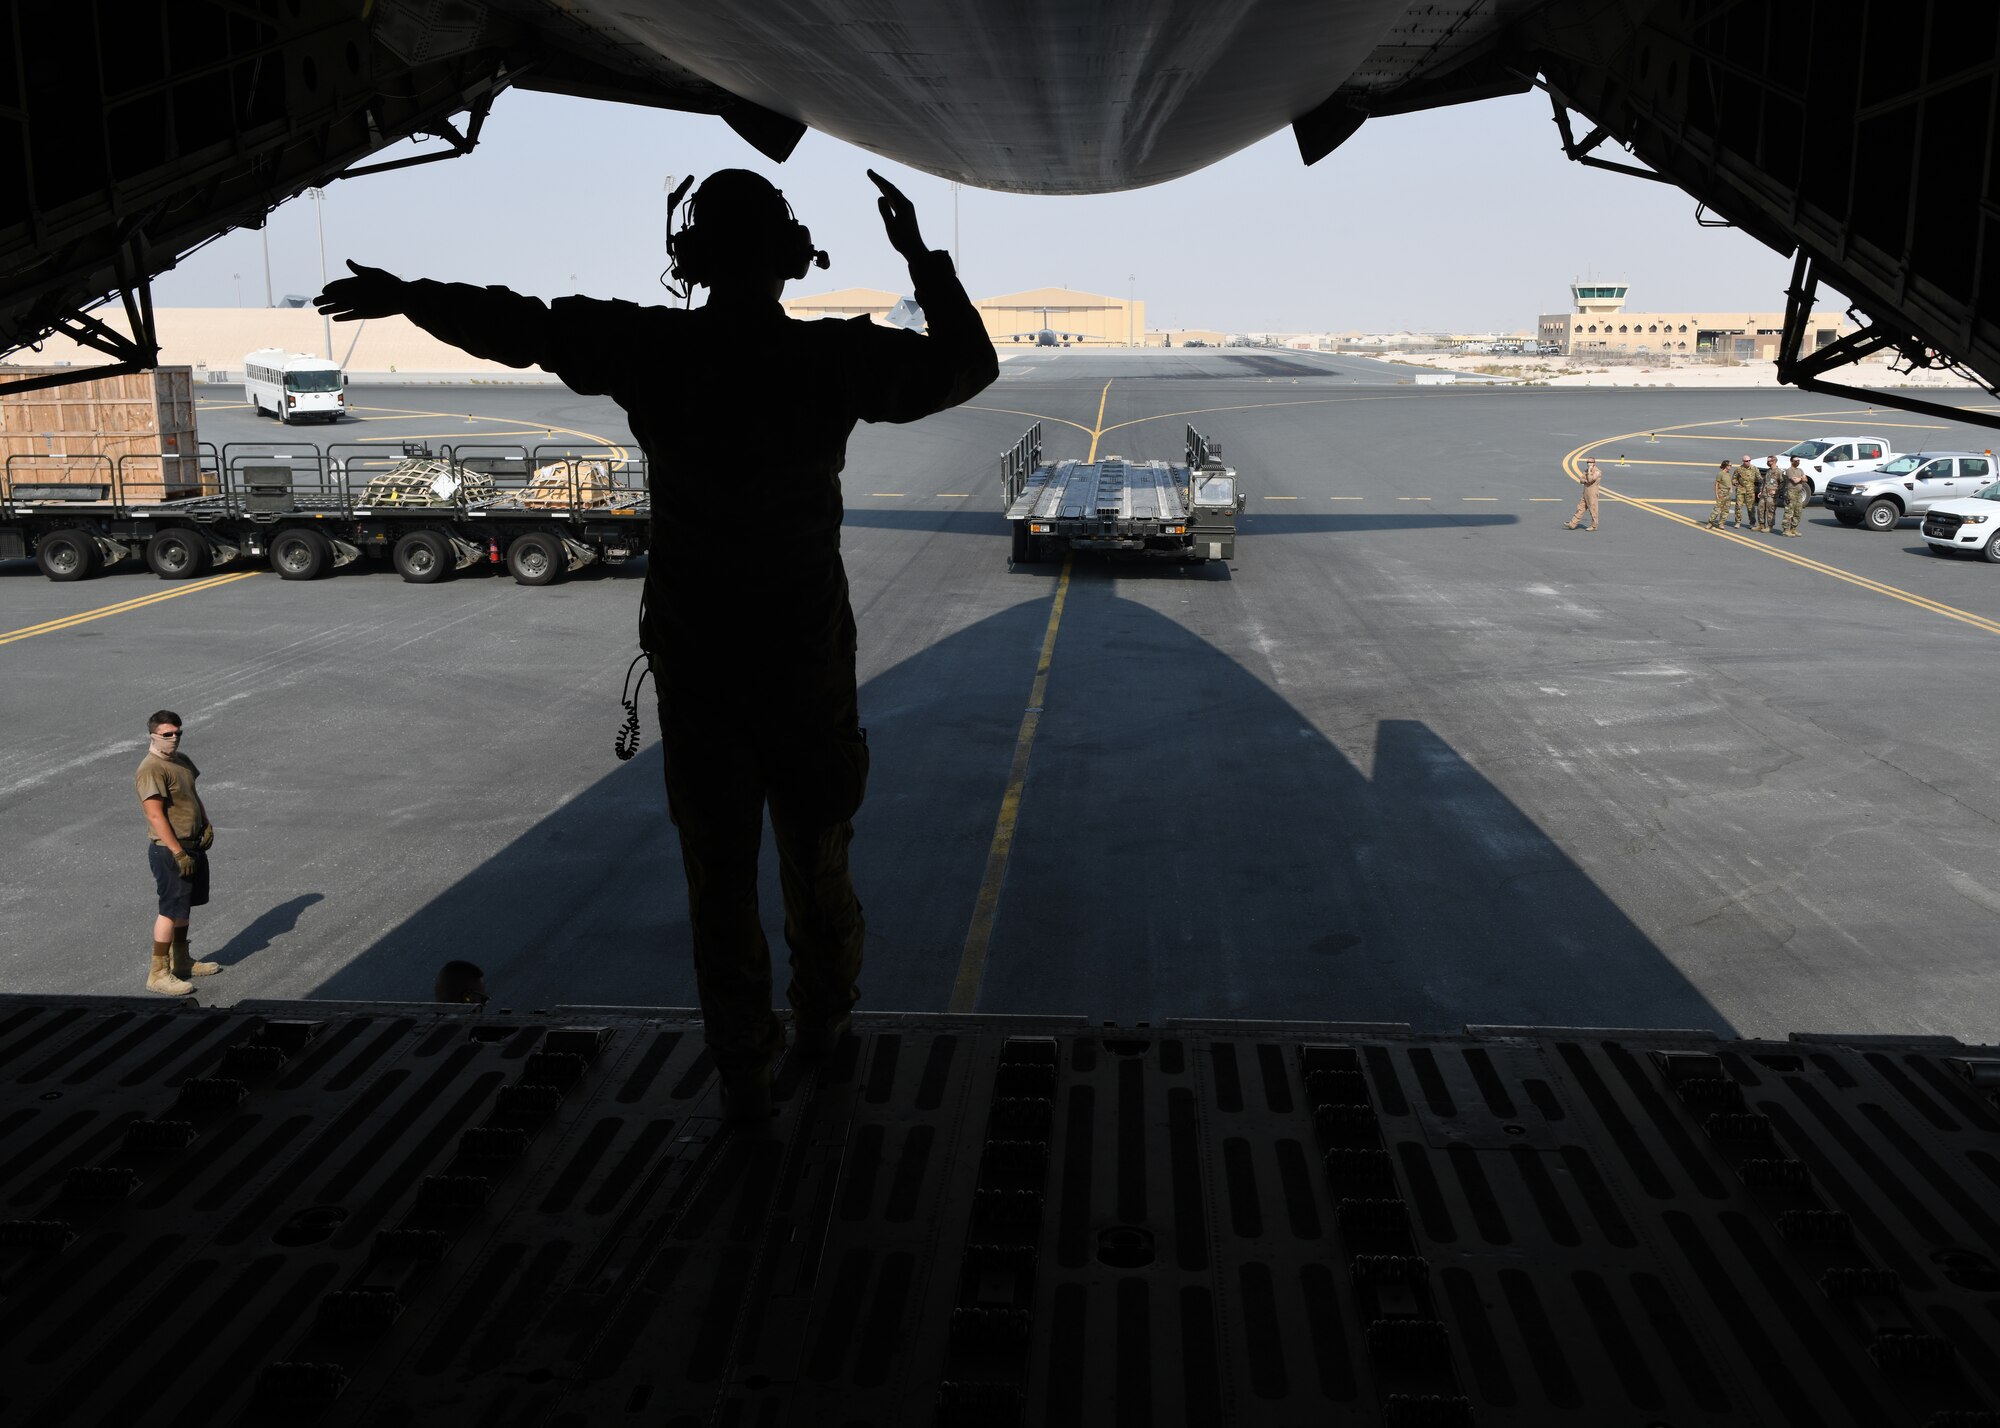 Airman 1st Class Taylor Robinson guides a Tunner 60K Loader toward a C-5 Galaxy on the flight line of Al Udeid Air Base, Qatar, Sept. 18, 2020, to off load a specialized medical container designed to transport individuals with infectious diseases. The Negatively Pressurized Conex, or NPC, is configured for the C-17 Globemaster III and C-5 Super Galaxy aircraft to safely transport up to 28 passengers or 23 patients, including ambulatory and litter, around the globe. (U.S. Air Force photo by Staff Sgt. Kayla White)